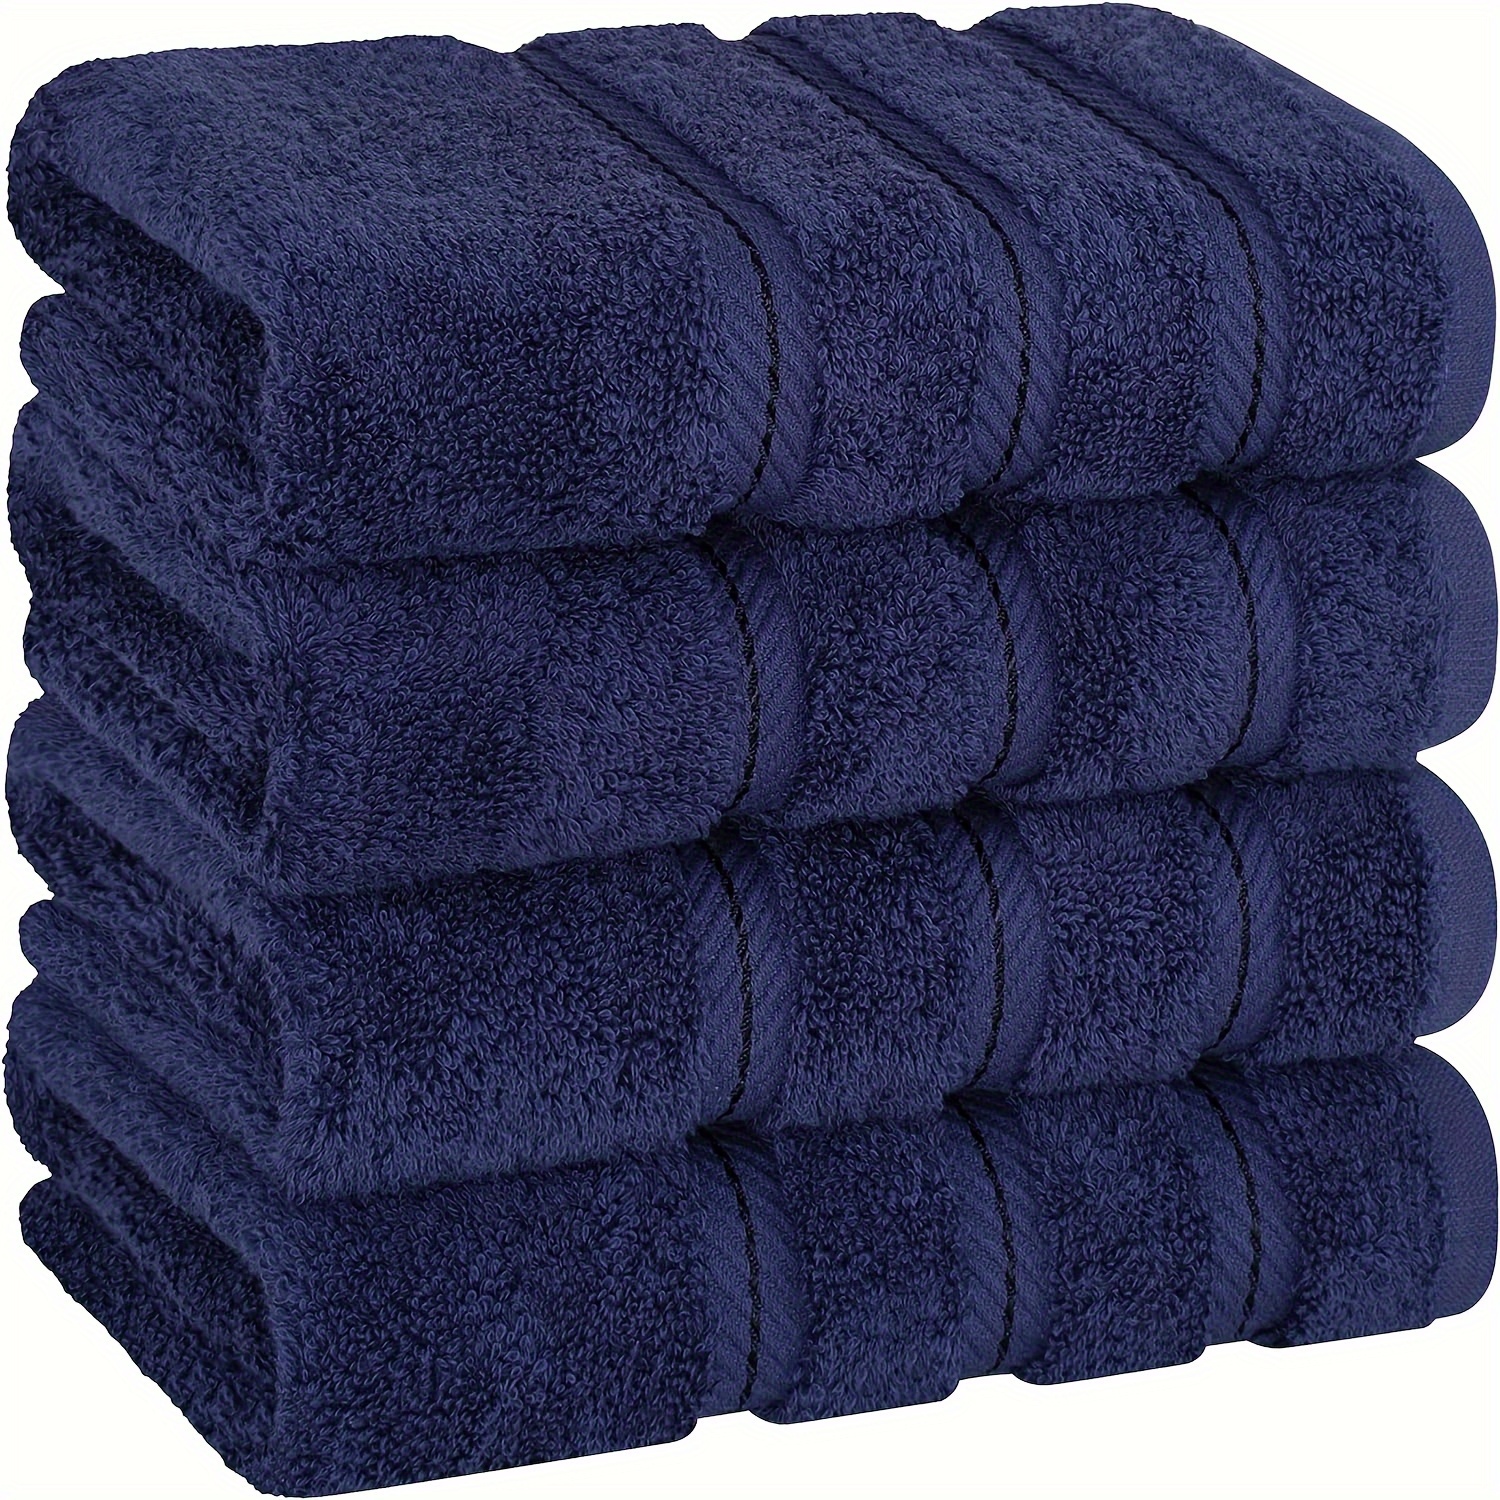 

4-piece Premium Twill Bath Towels Set, 100% Cotton Soft Skin-friendly, Quick-dry Absorbent, Ideal For Home, Hotel, Beauty Salon, Spa, Bathroom Use - 450 Gsm